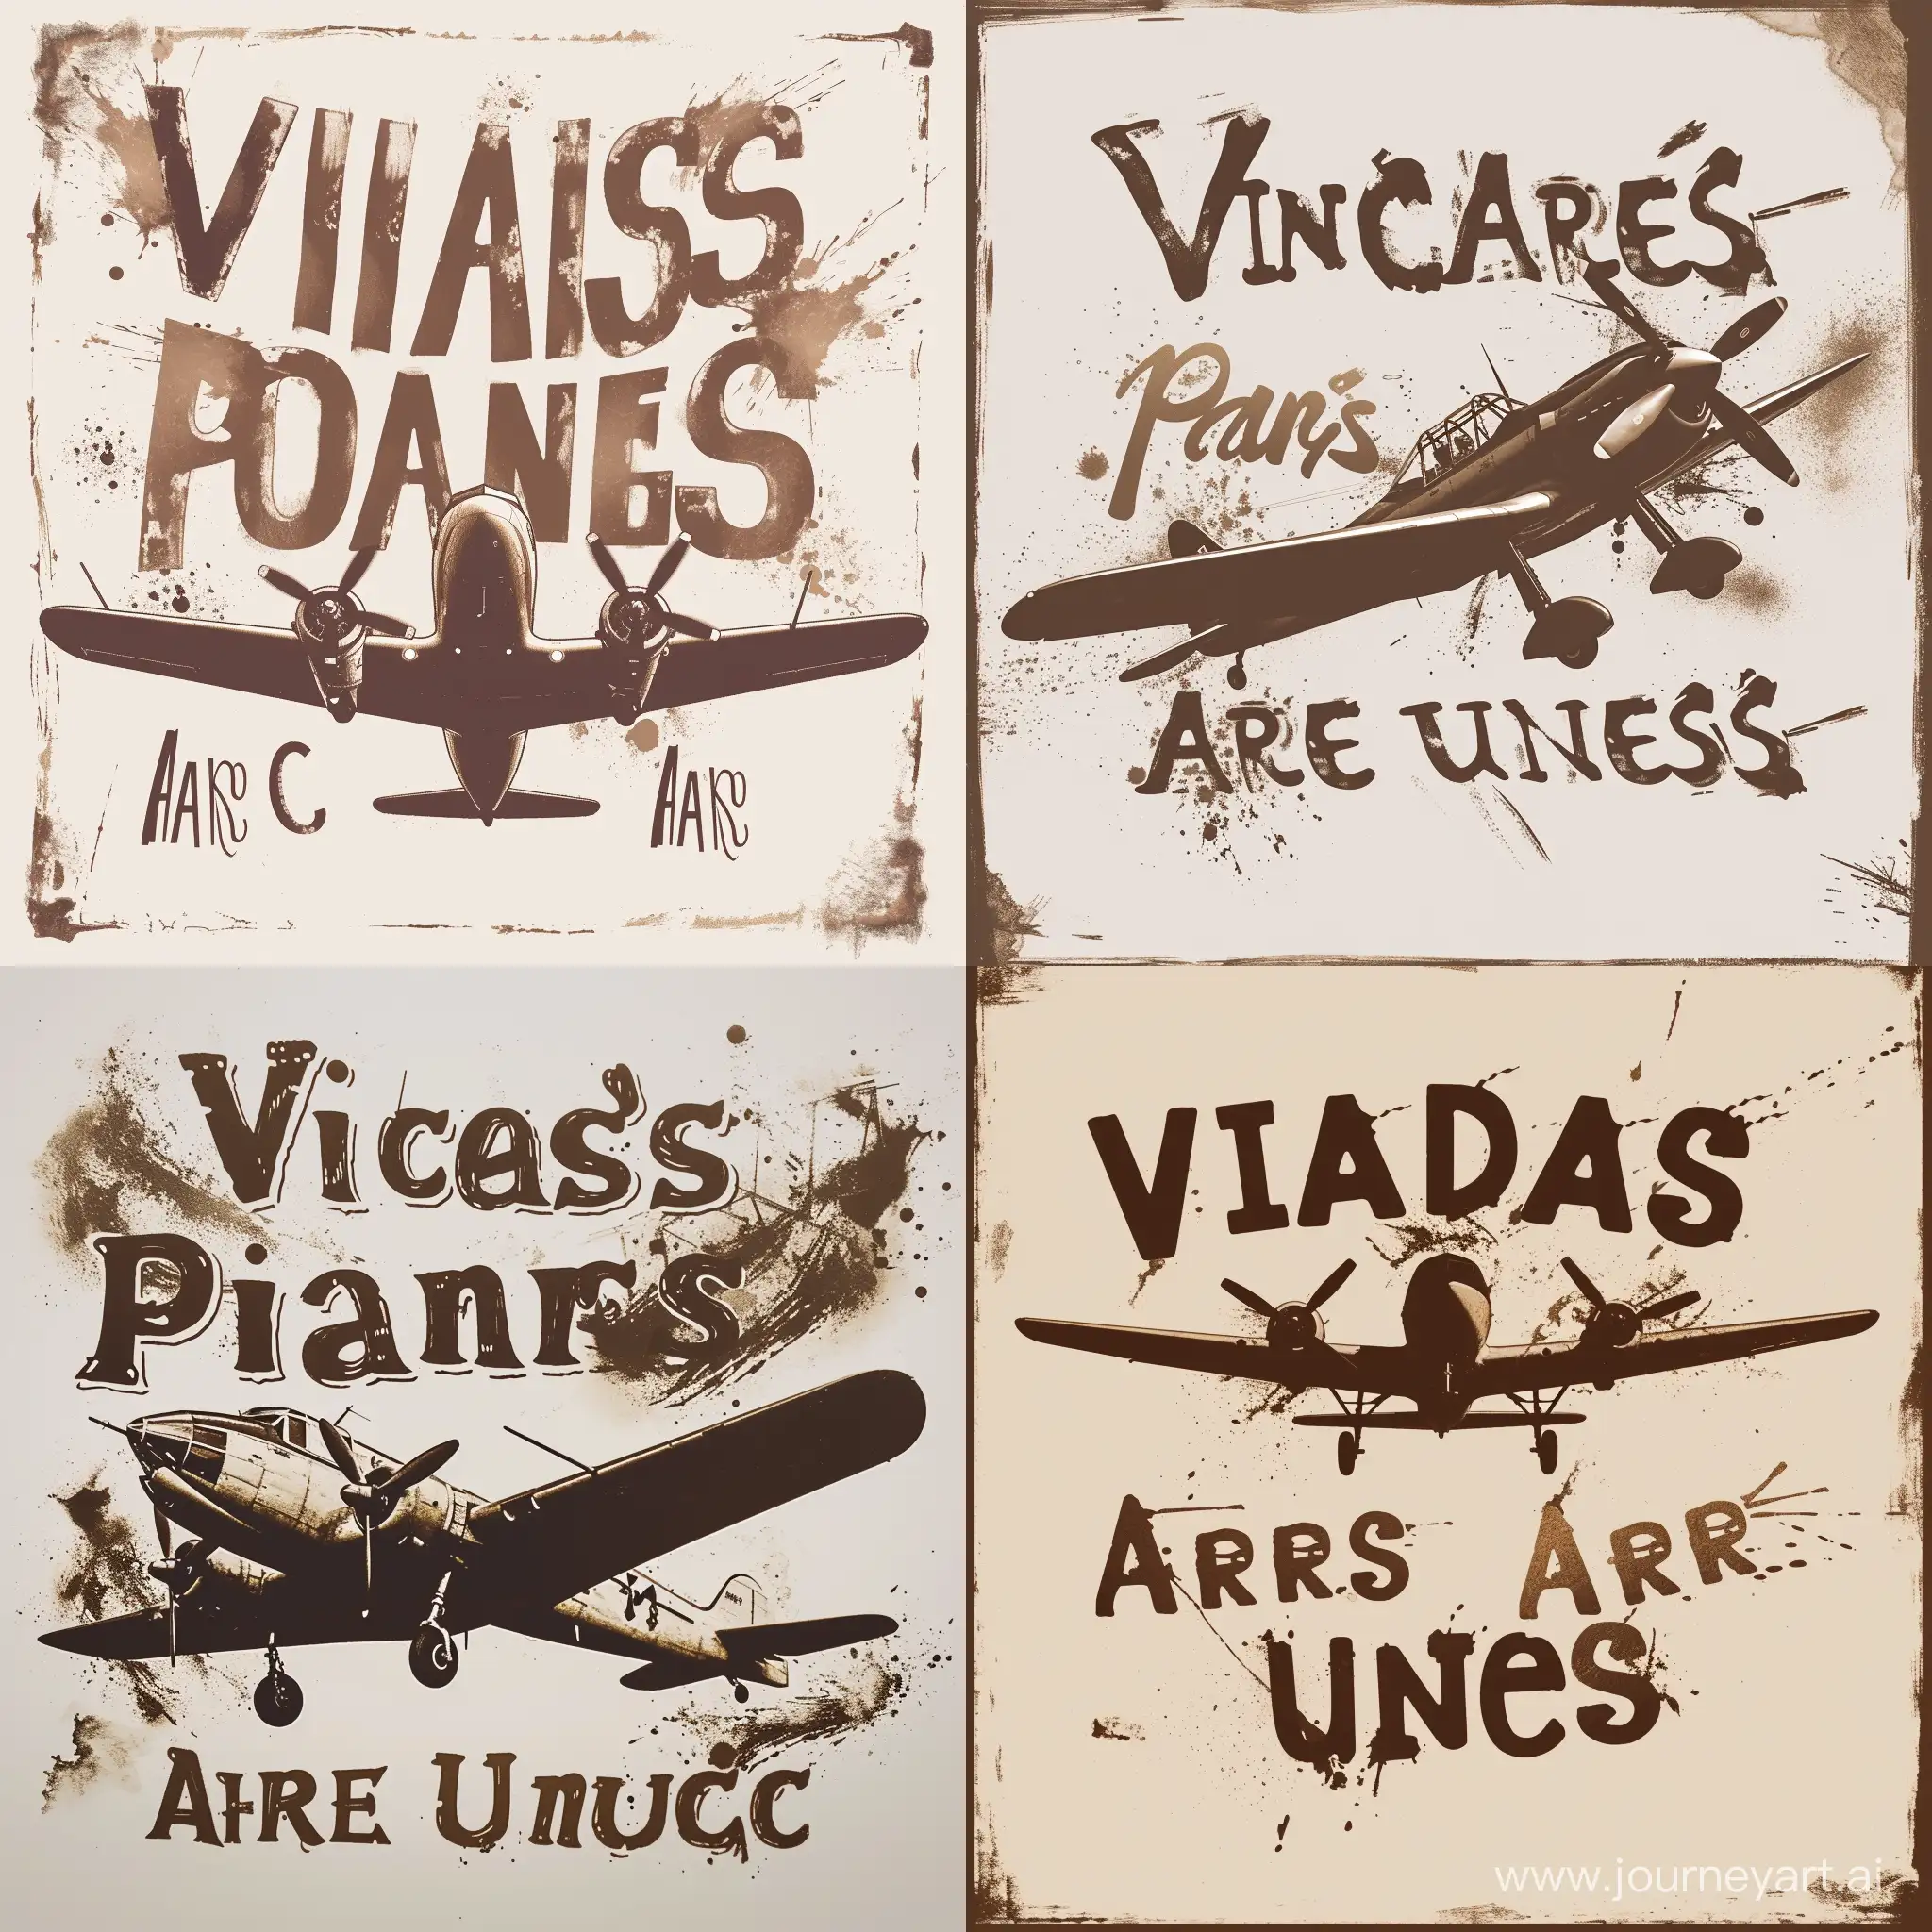 Imagine you are a fan of aviation history and you want to show your appreciation for the old-fashioned planes that paved the way for modern flight. You choose a sepia-toned image of a vintage aeroplane, with its propellers, wings, and cockpit clearly visible. You write the words 'vintage planes are unique' in a splash style font, using different shades of brown for each word. You use dark brown for 'vintage', to match the color of the plane and create a contrast with the lighter background. You use light brown for 'planes', to make it blend in with the sky and look like it is flying. You use medium brown for 'are unique', to balance the other two words and emphasize the message. You also add some splashes of paint around the words, to create a dynamic and artistic effect. You are happy with your image, as it reflects your passion and your style.